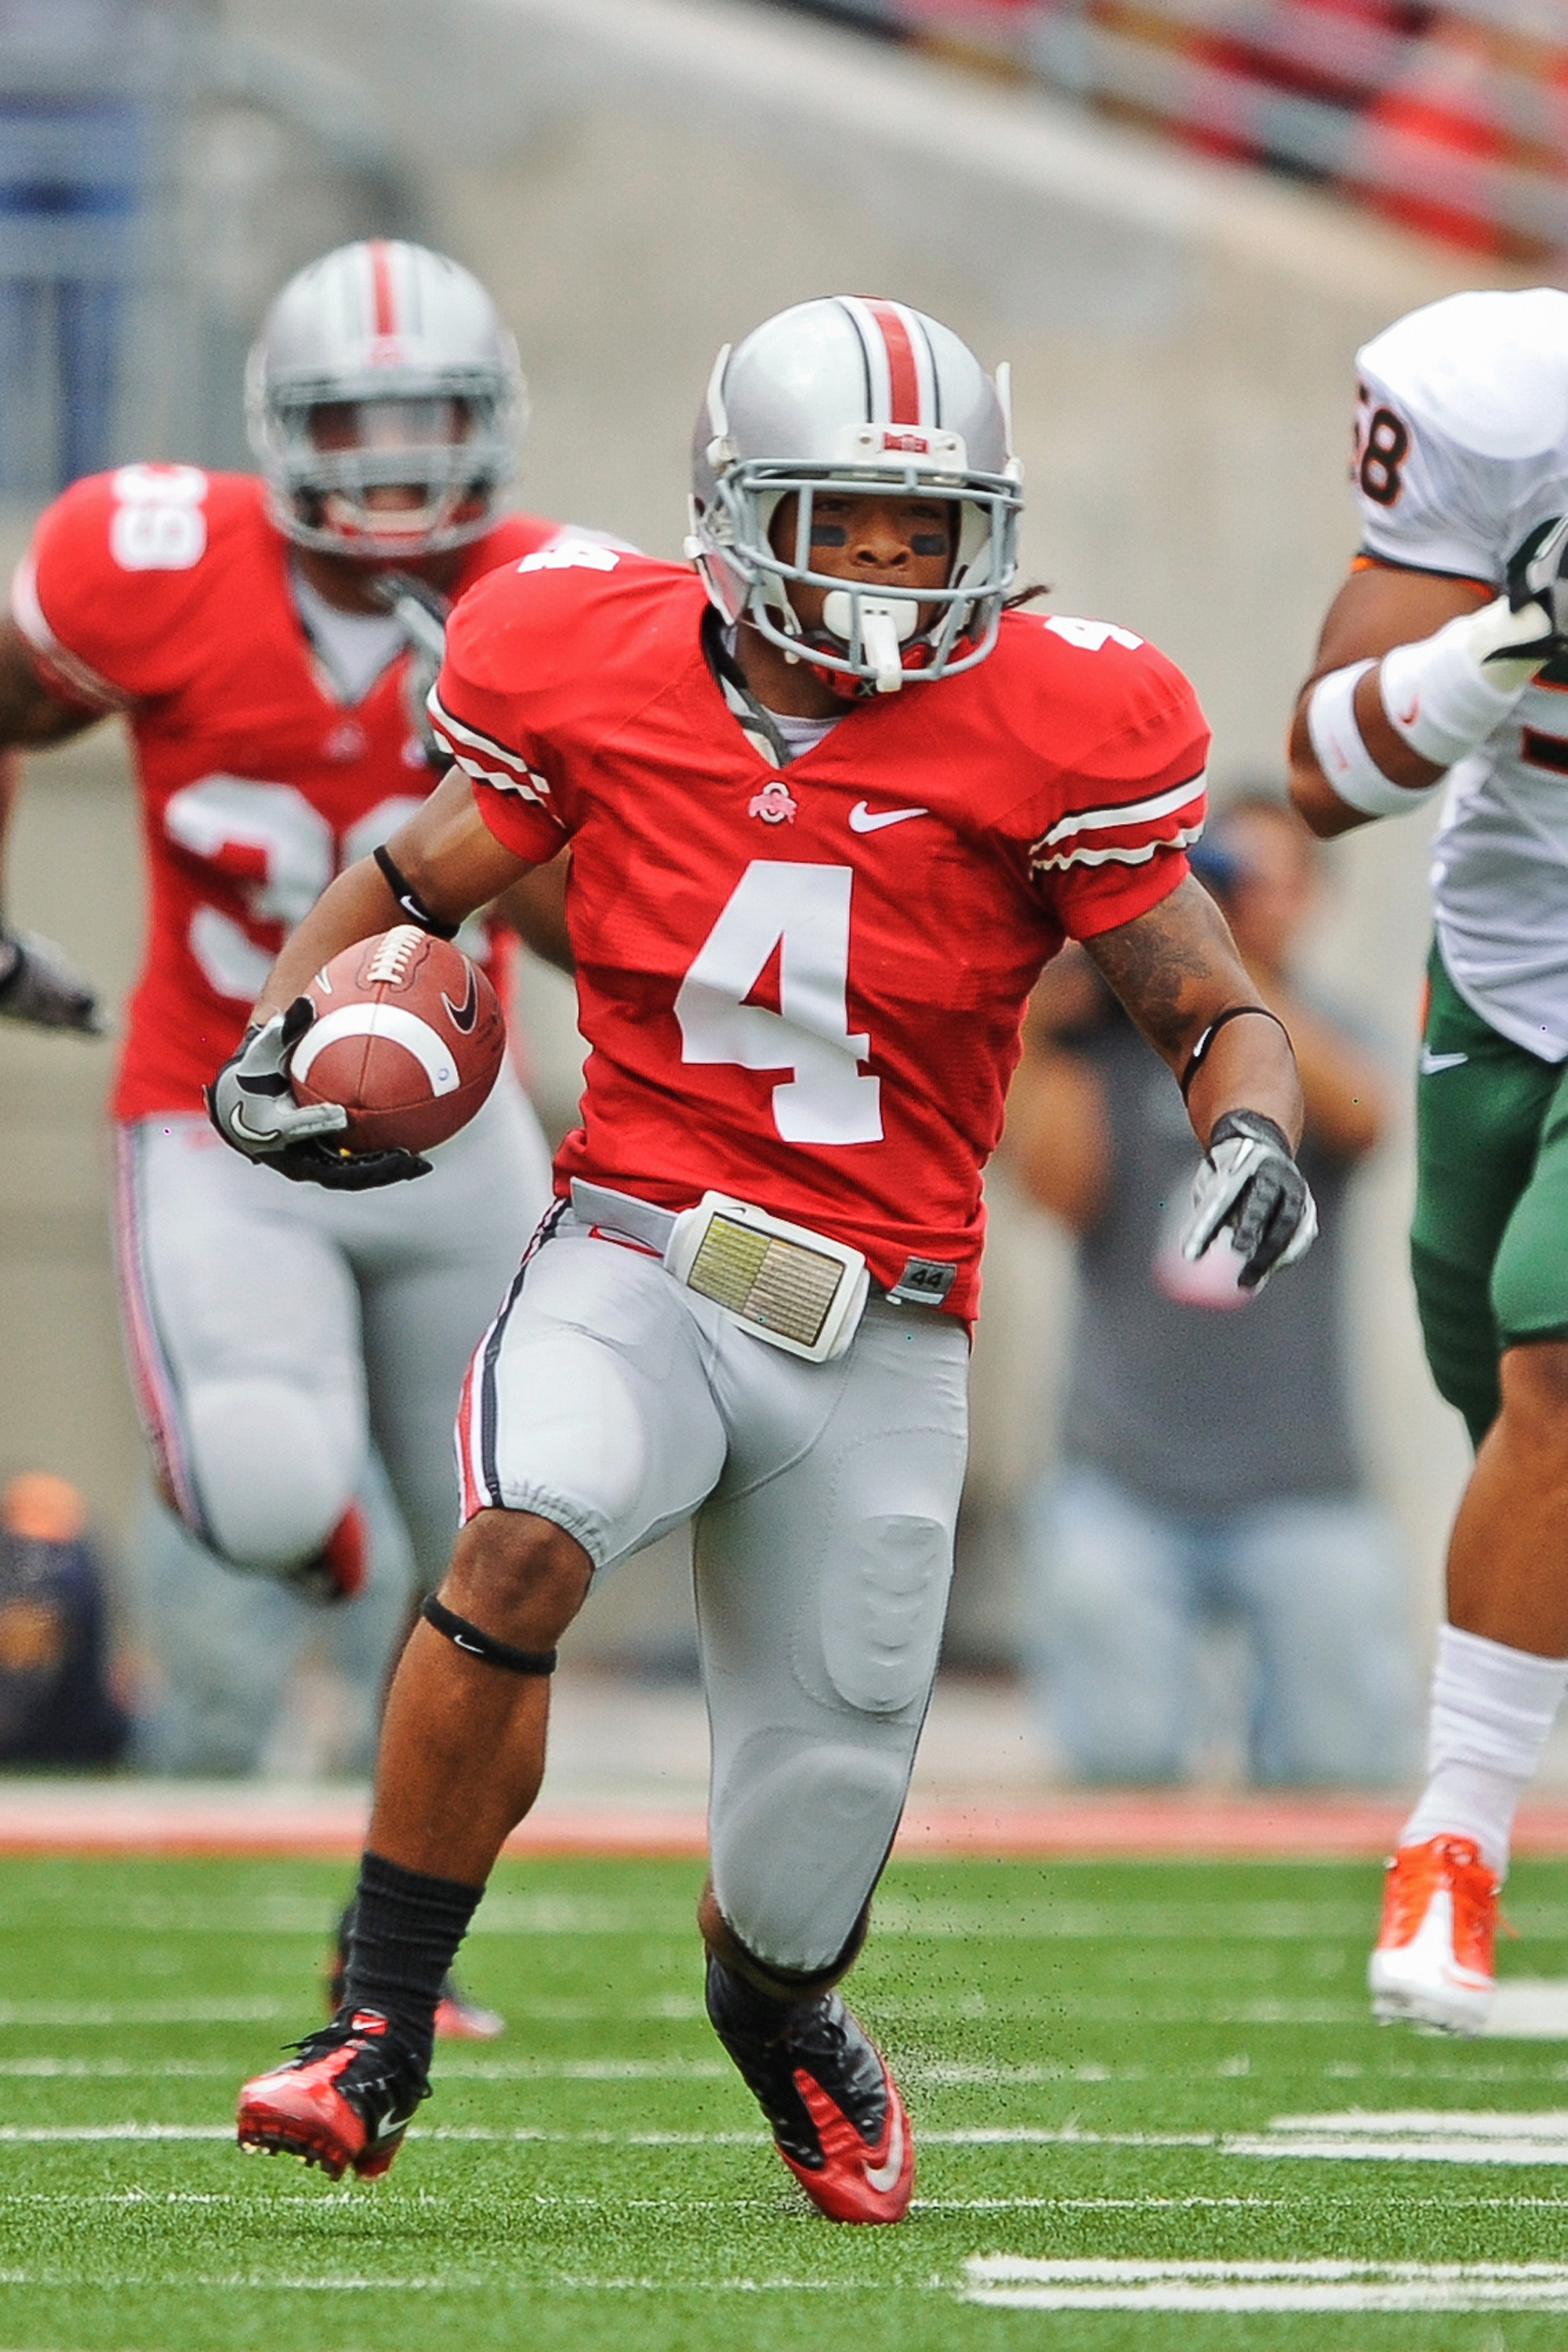 COLUMBUS, OH - SEPTEMBER 11:  Jaamal Berry #4 of the Ohio State Buckeyes runs with the ball against the Miami Hurricanes at Ohio Stadium on September 11, 2010 in Columbus, Ohio.  (Photo by Jamie Sabau/Getty Images)